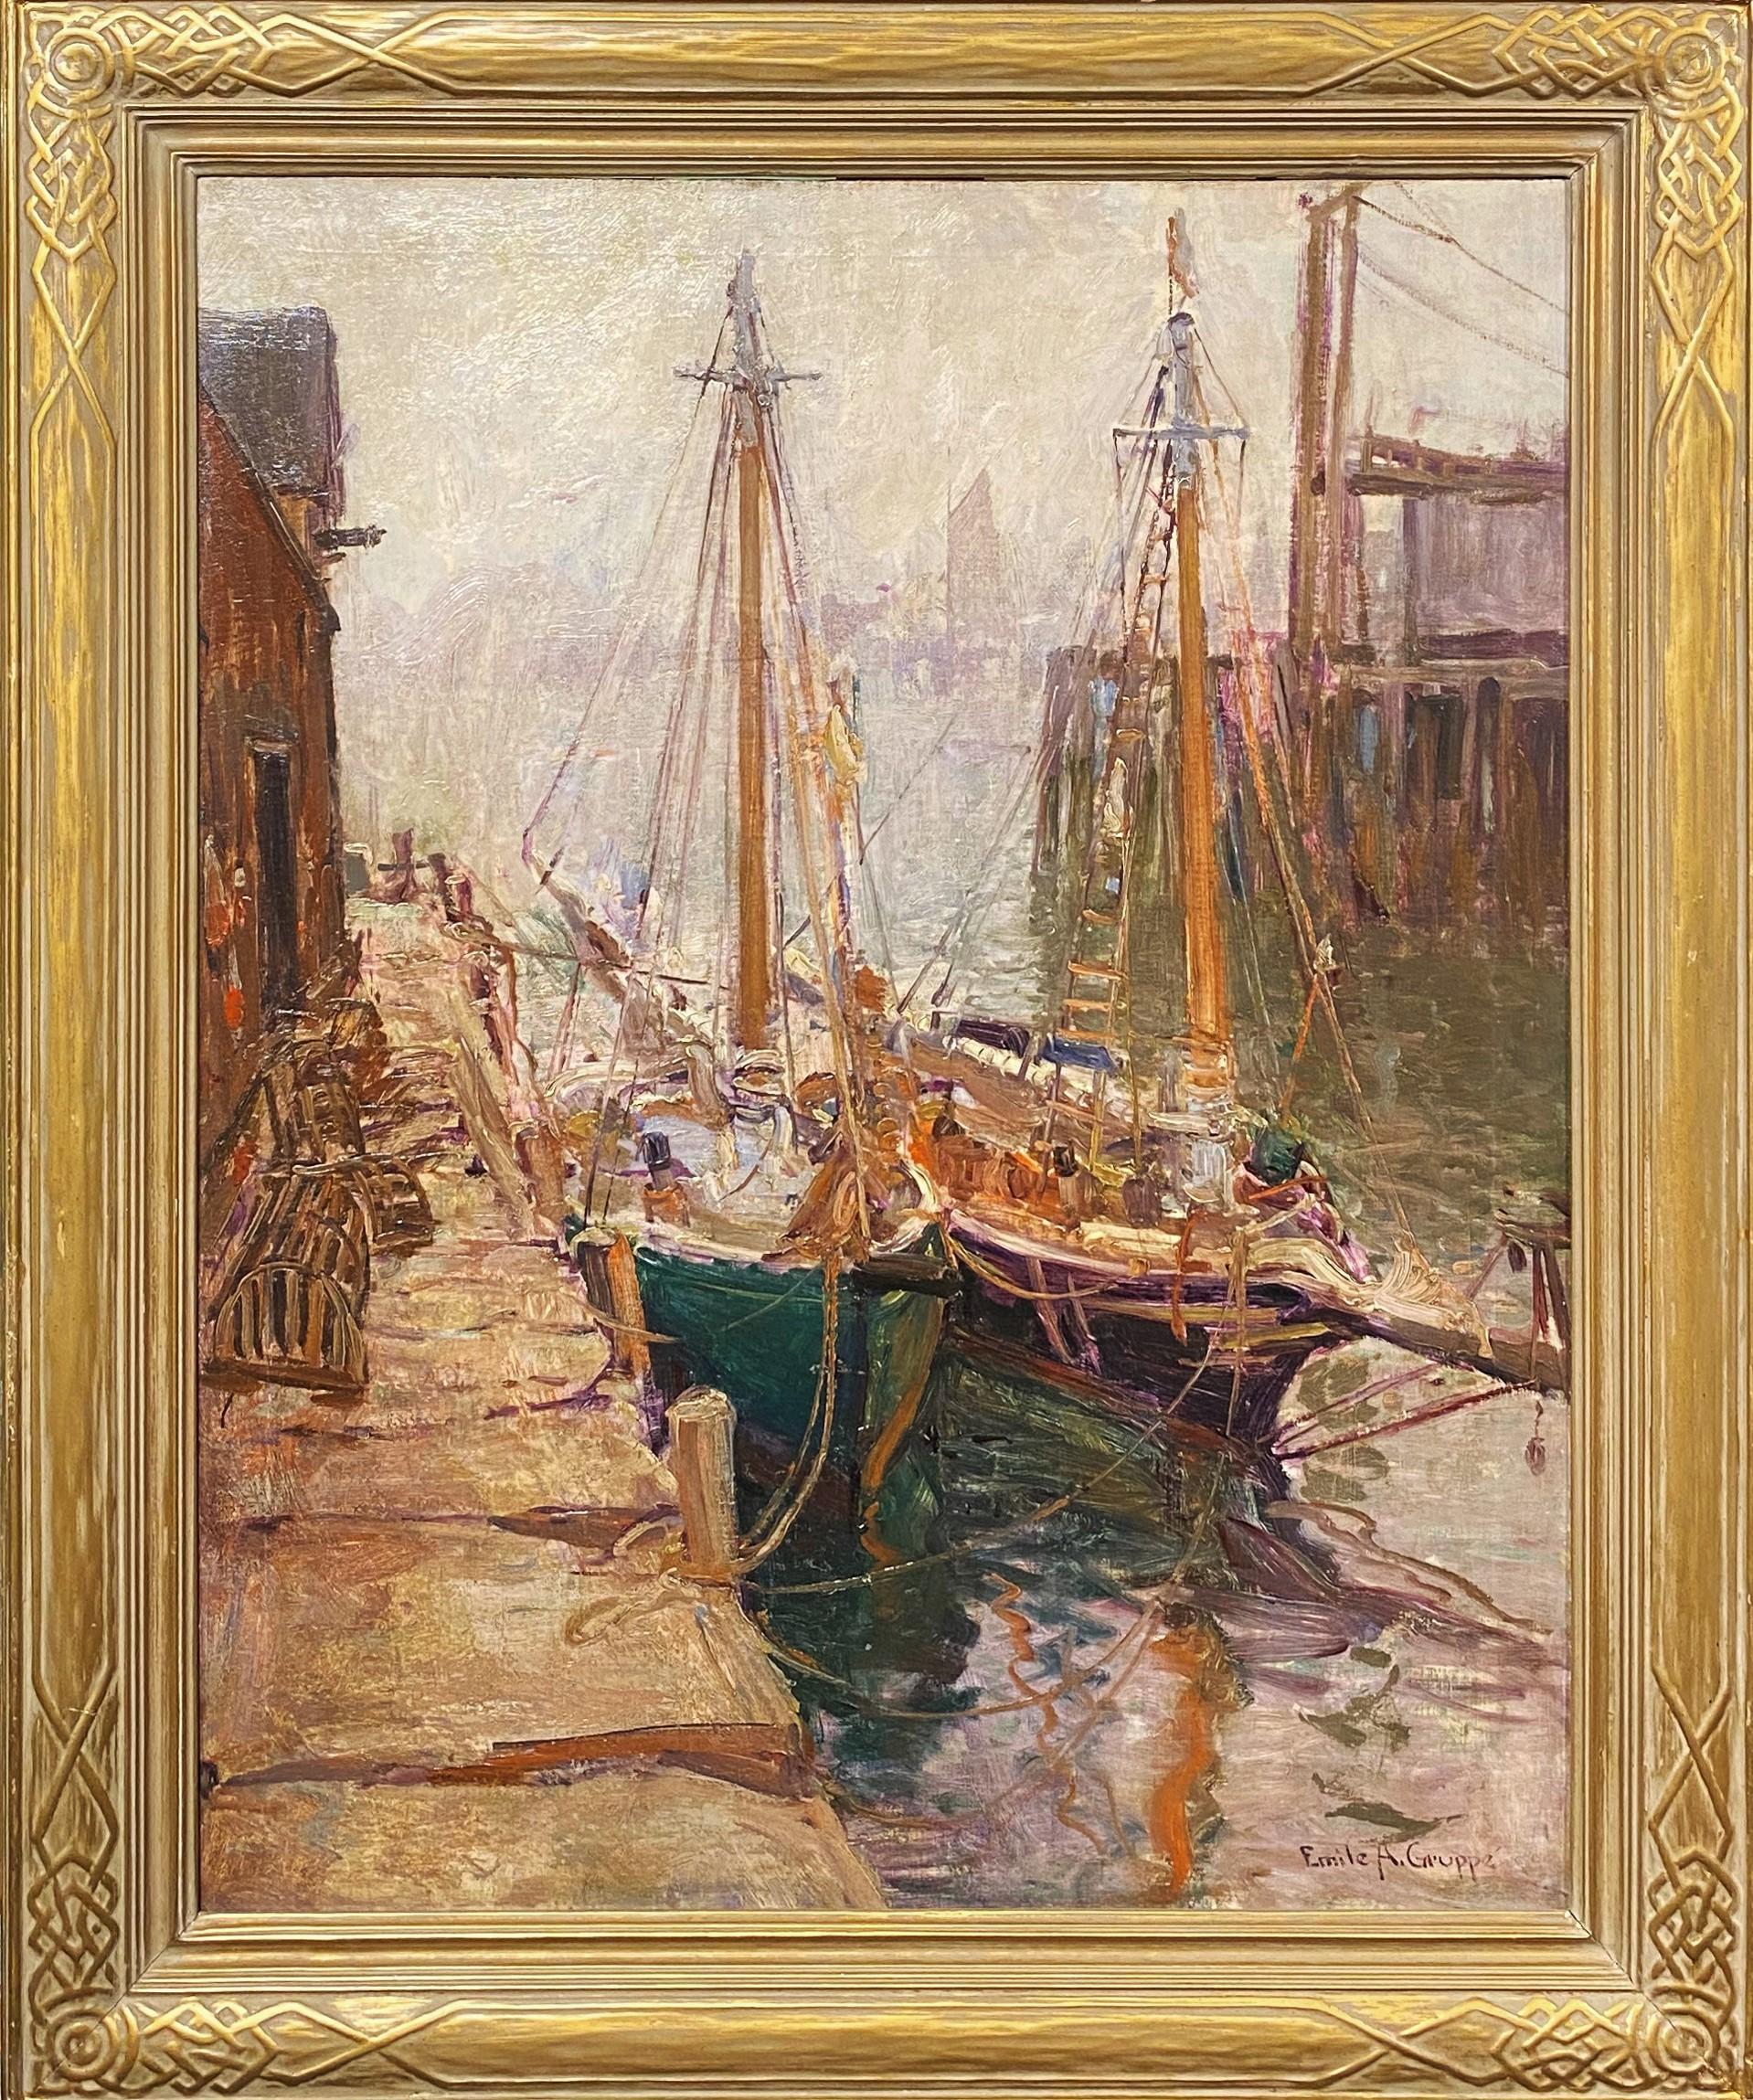 Gloucester Boats - Painting by Emile Albert Gruppe